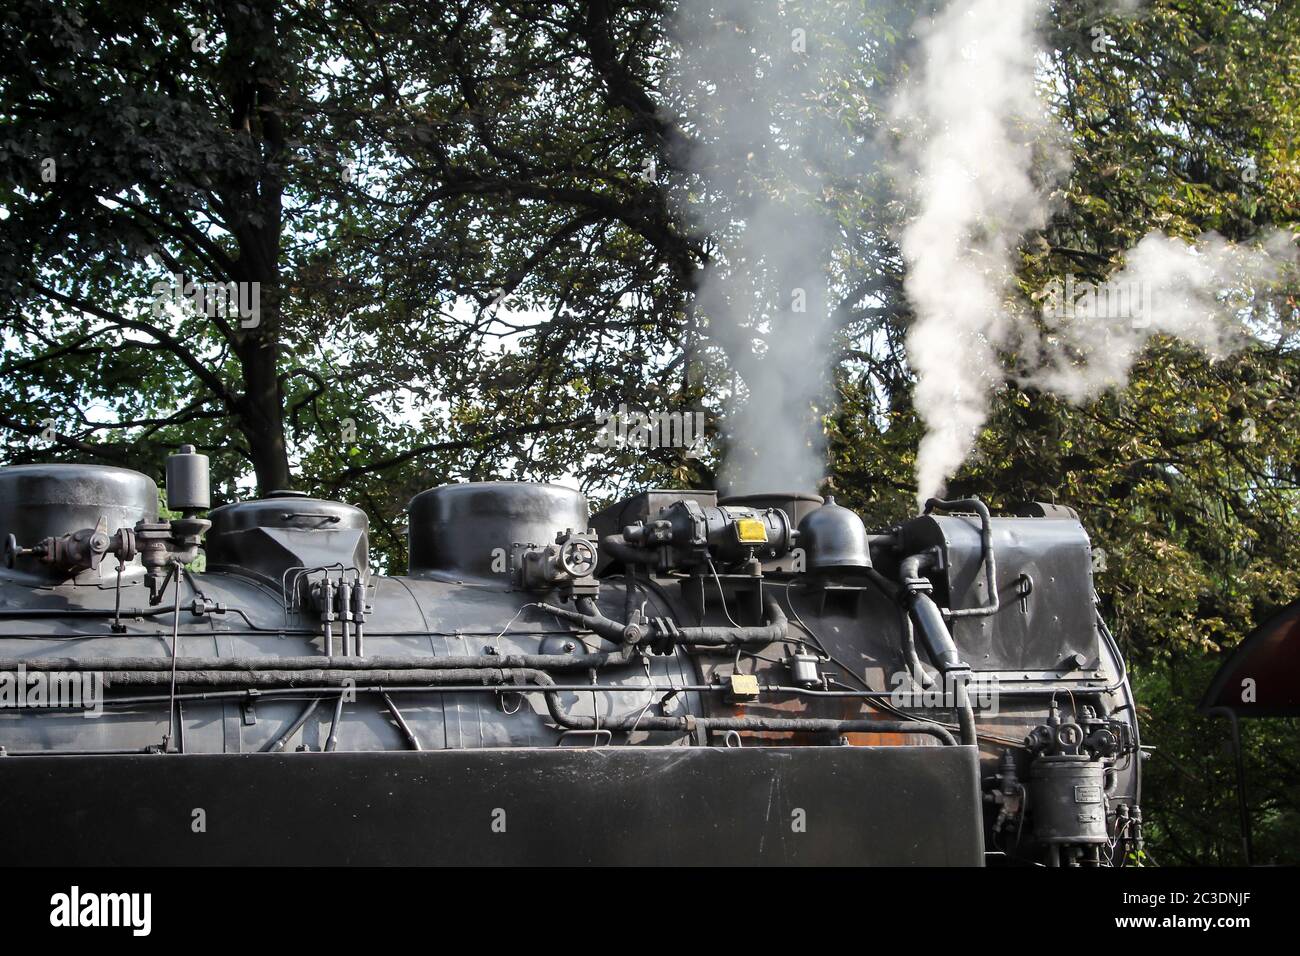 View of an old steam locomotive, details of a locomotive Stock Photo